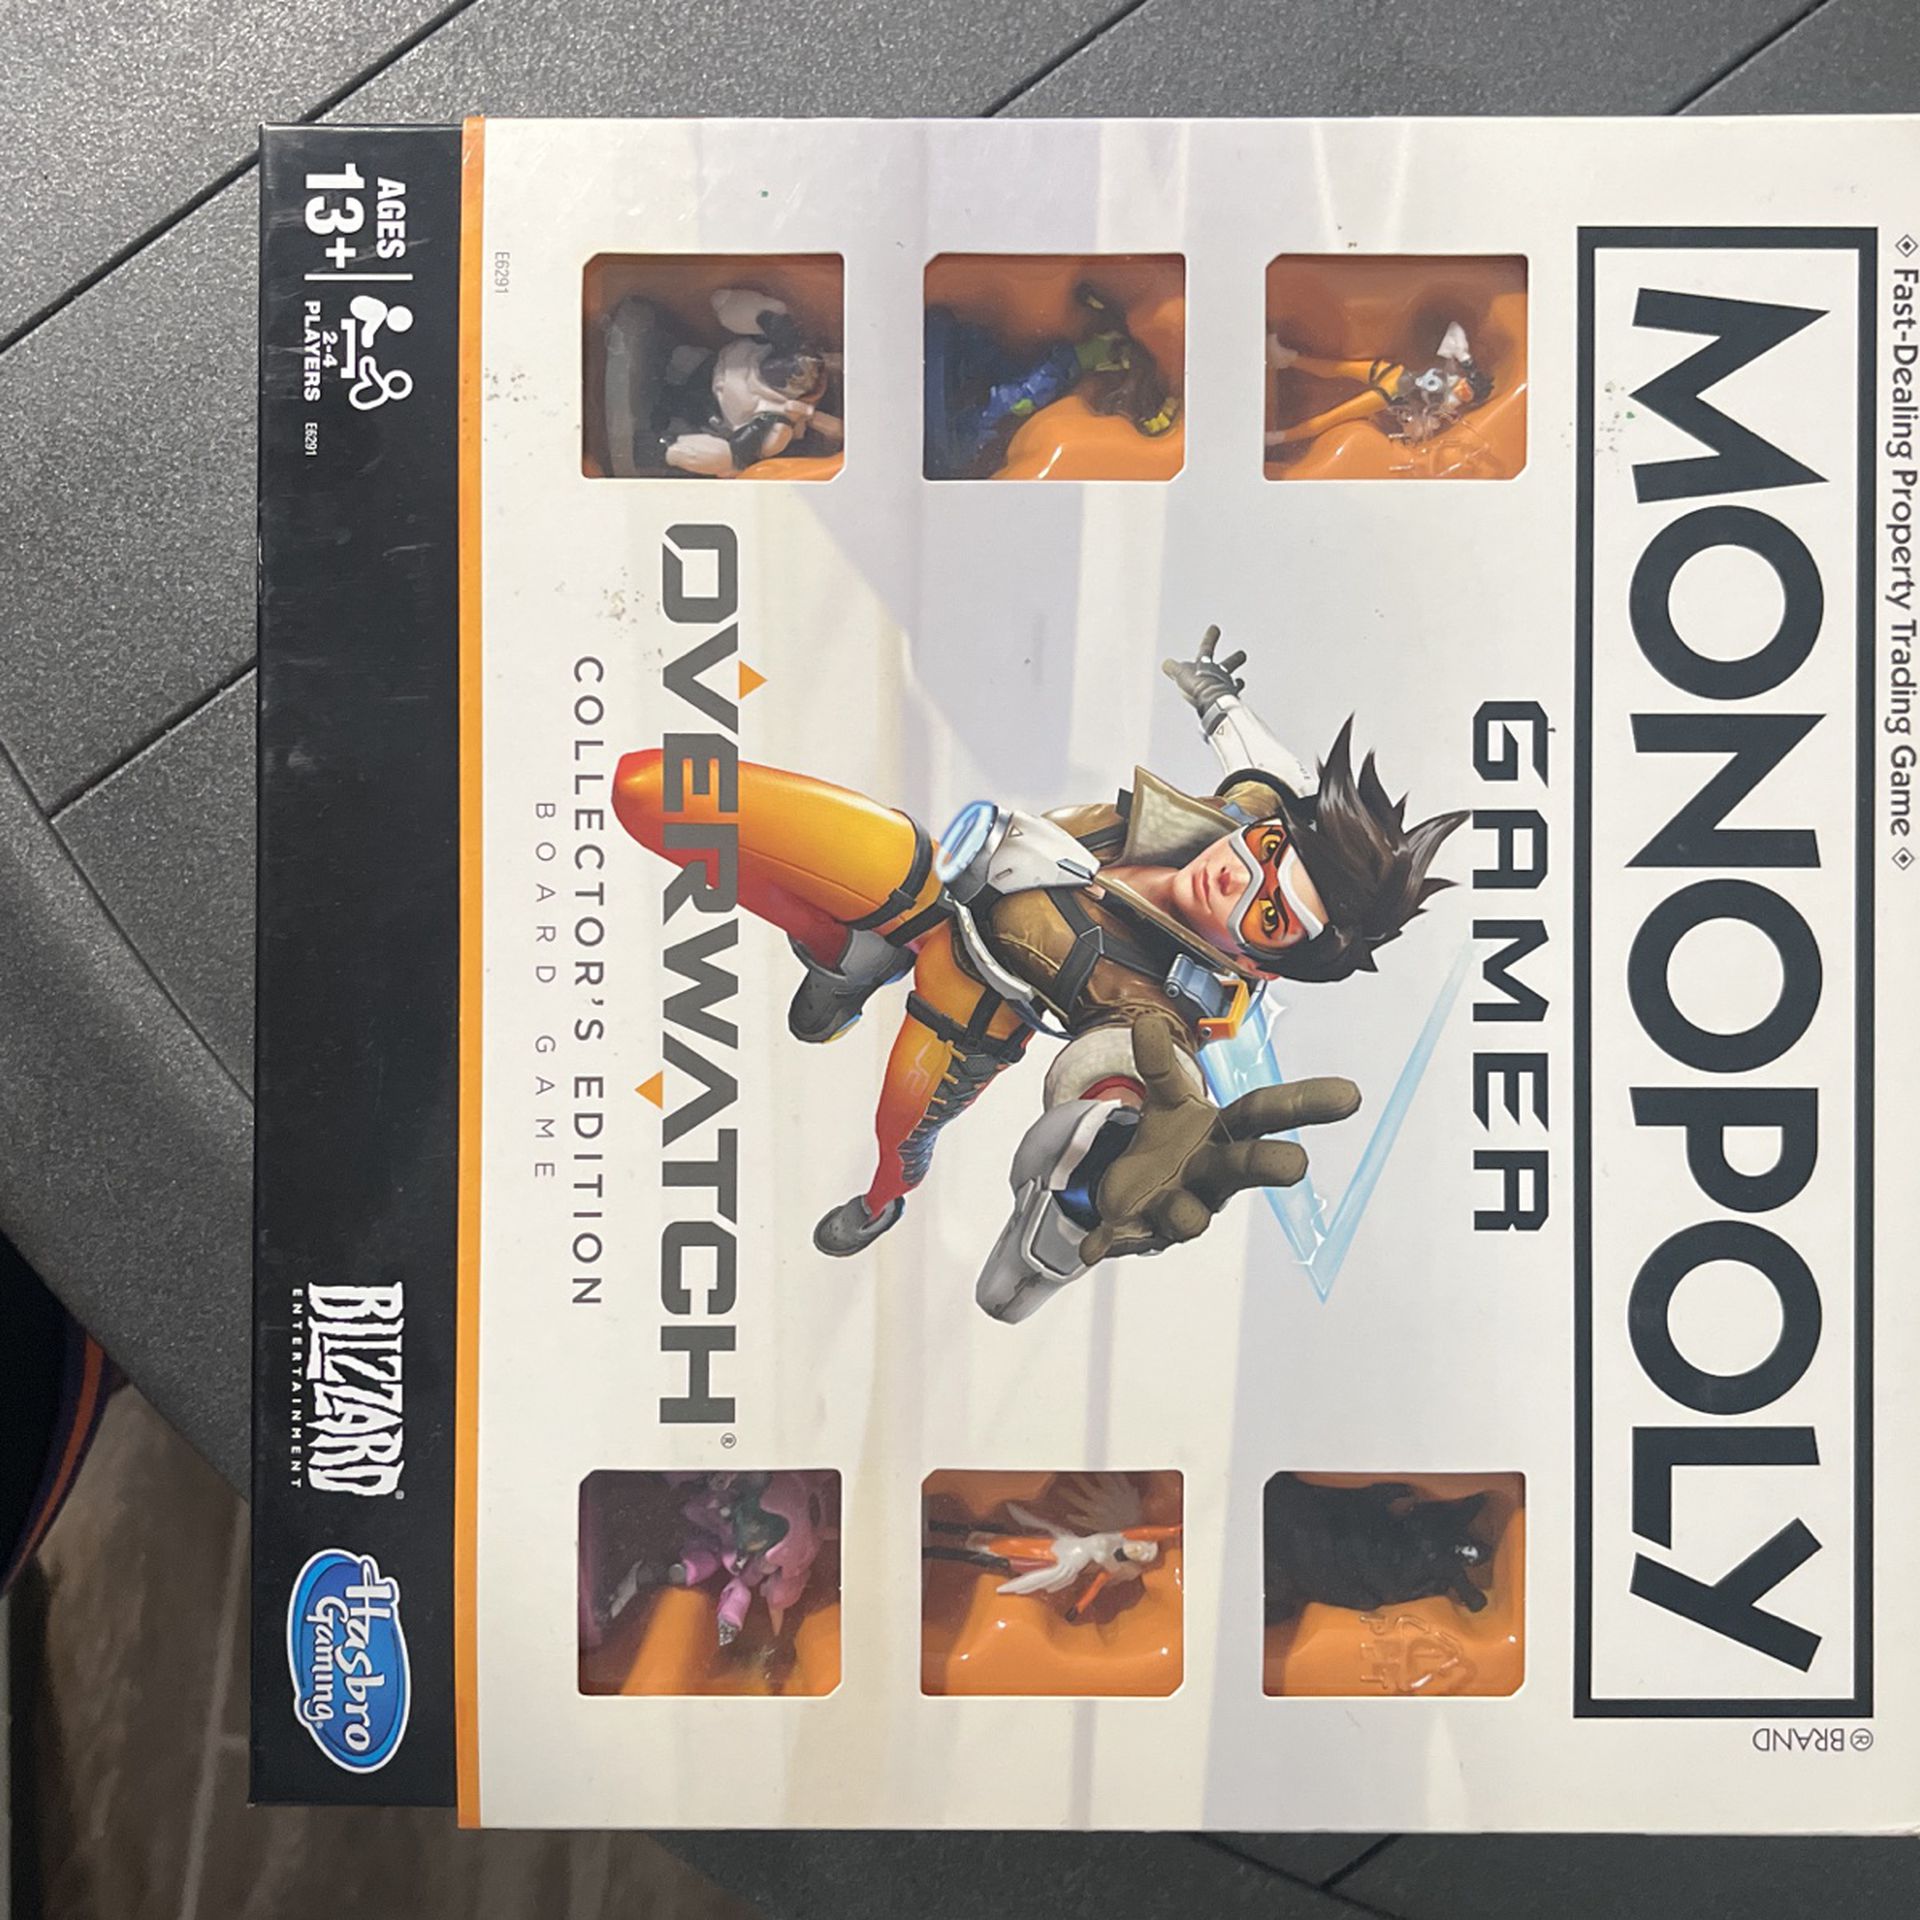 Overwatch Collectors Edition Monopoly